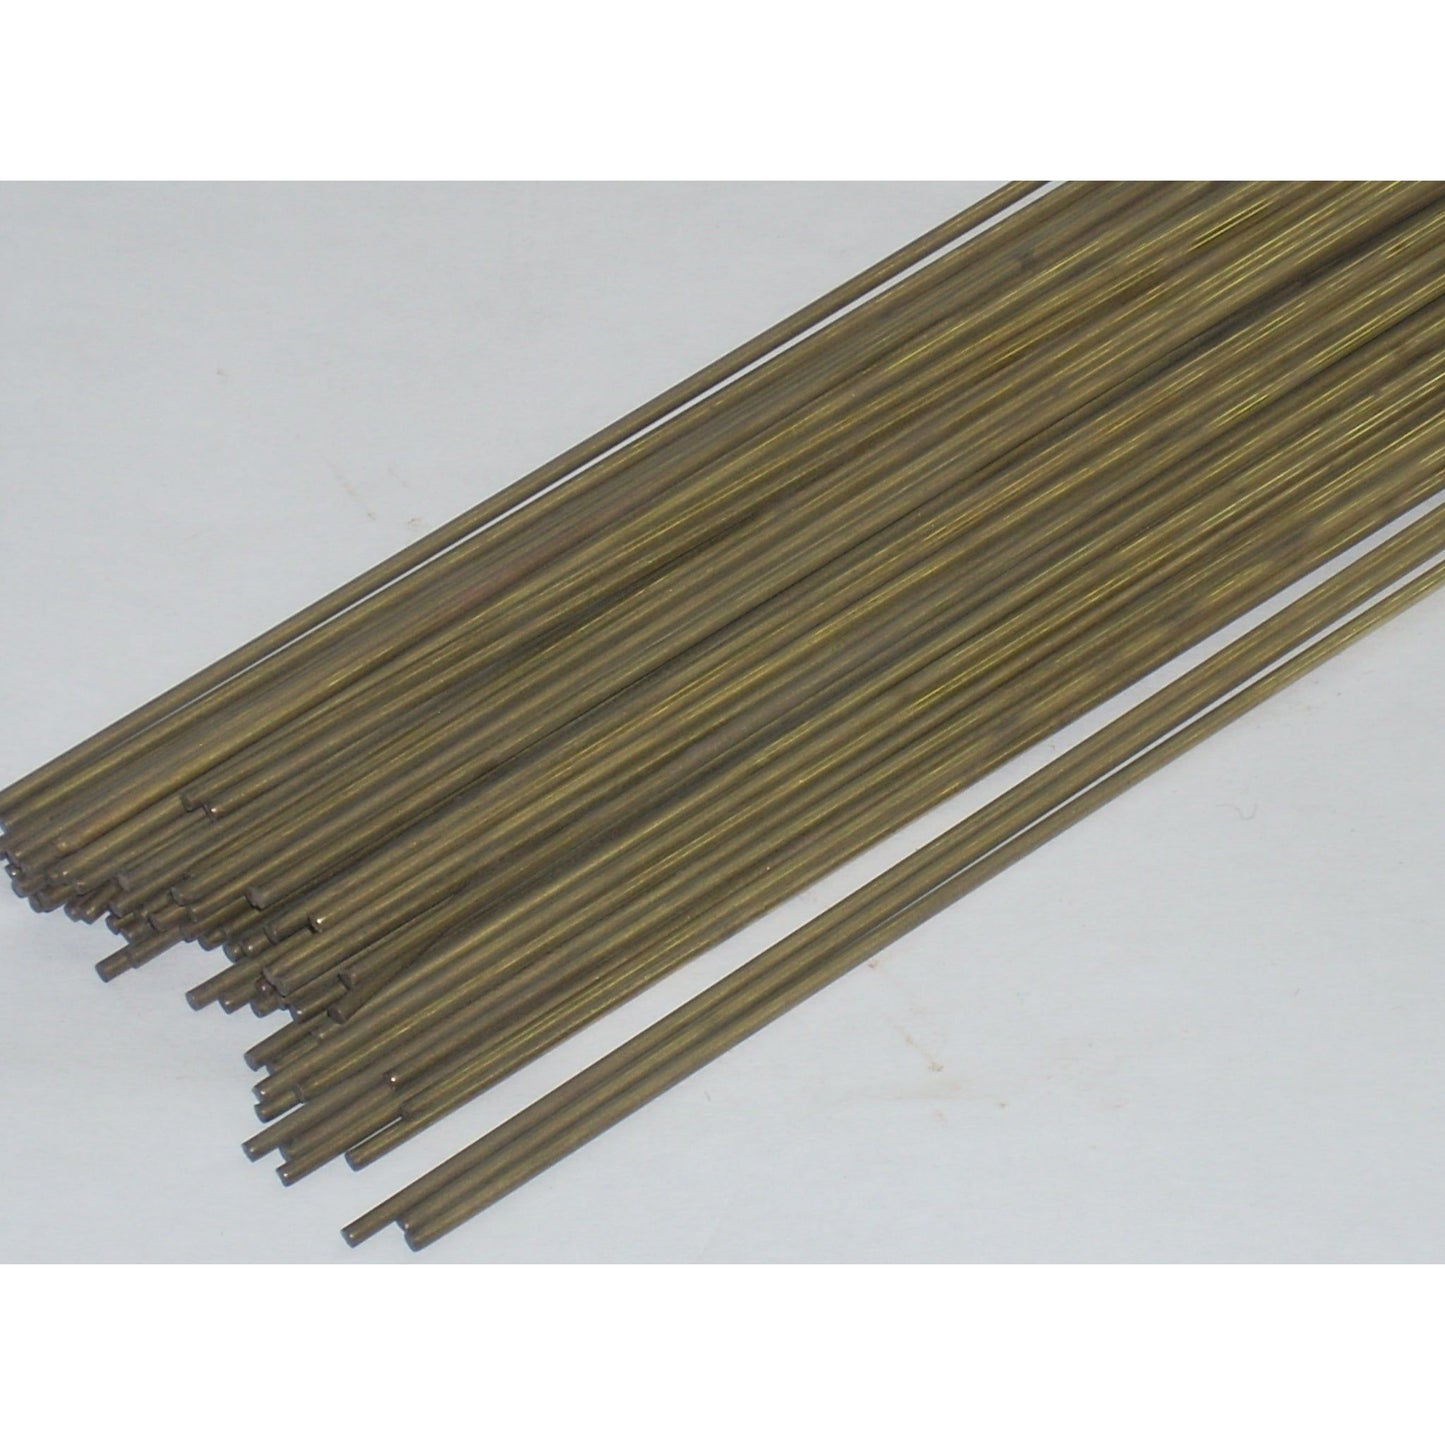 Low Fuming Bronze Bare Gas Brazing Rods 1/16 x 36 - 2.32 lbs